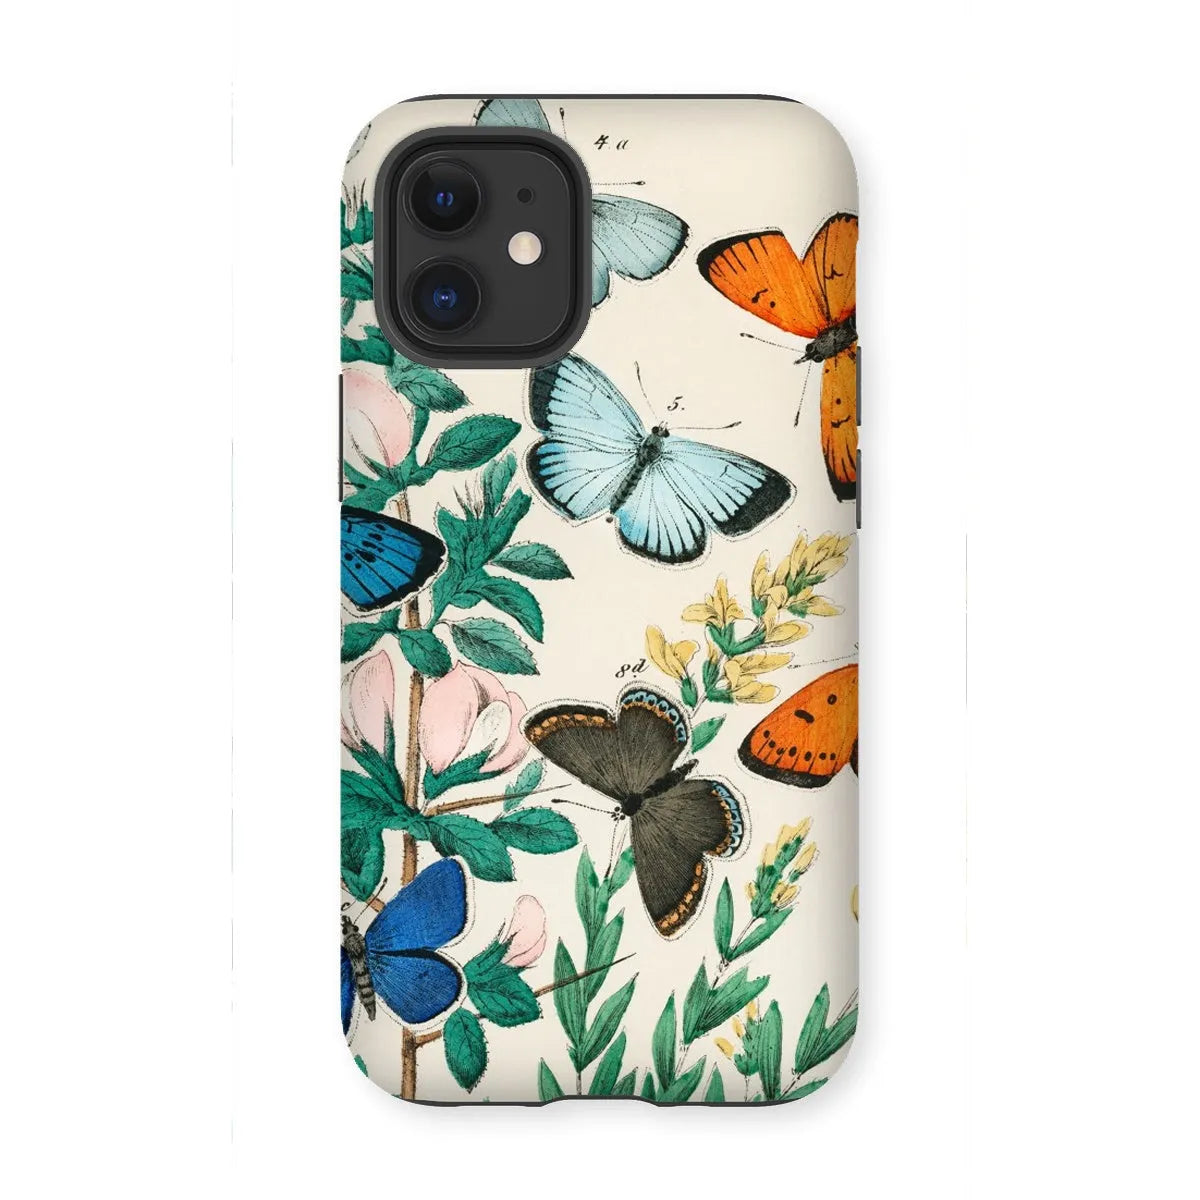 Another Butterfly Aesthetic Art Phone Case - William Forsell Kirby - Iphone 12 Mini / Matte - Mobile Phone Cases